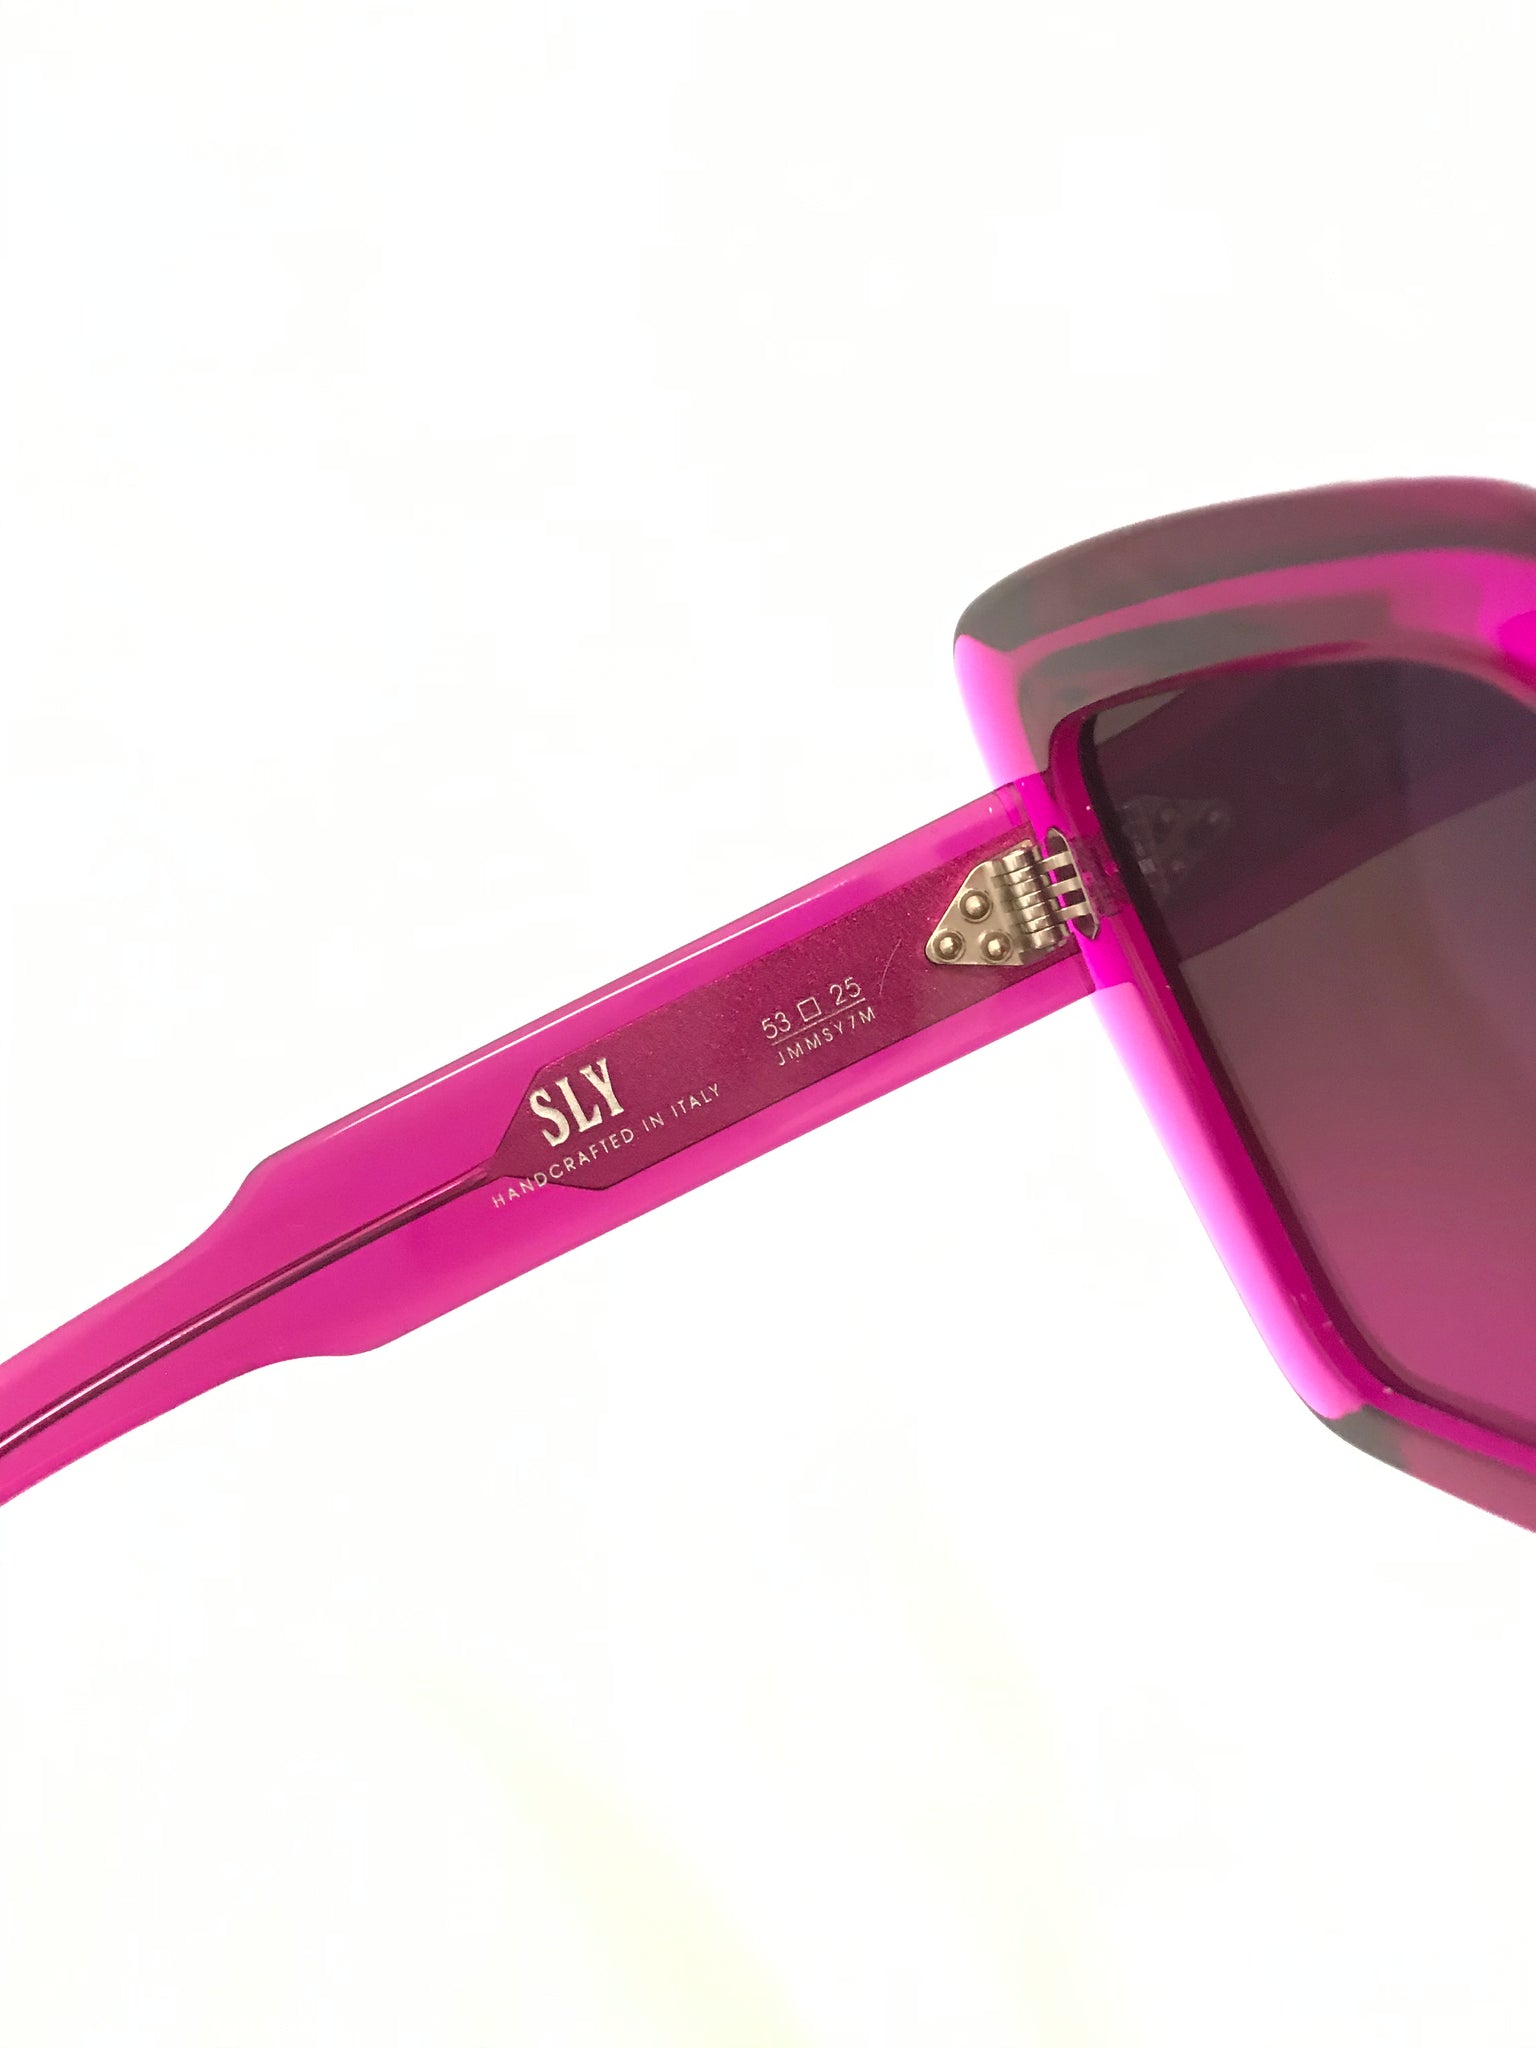 Limited Edition 'Sly' Sunglasses